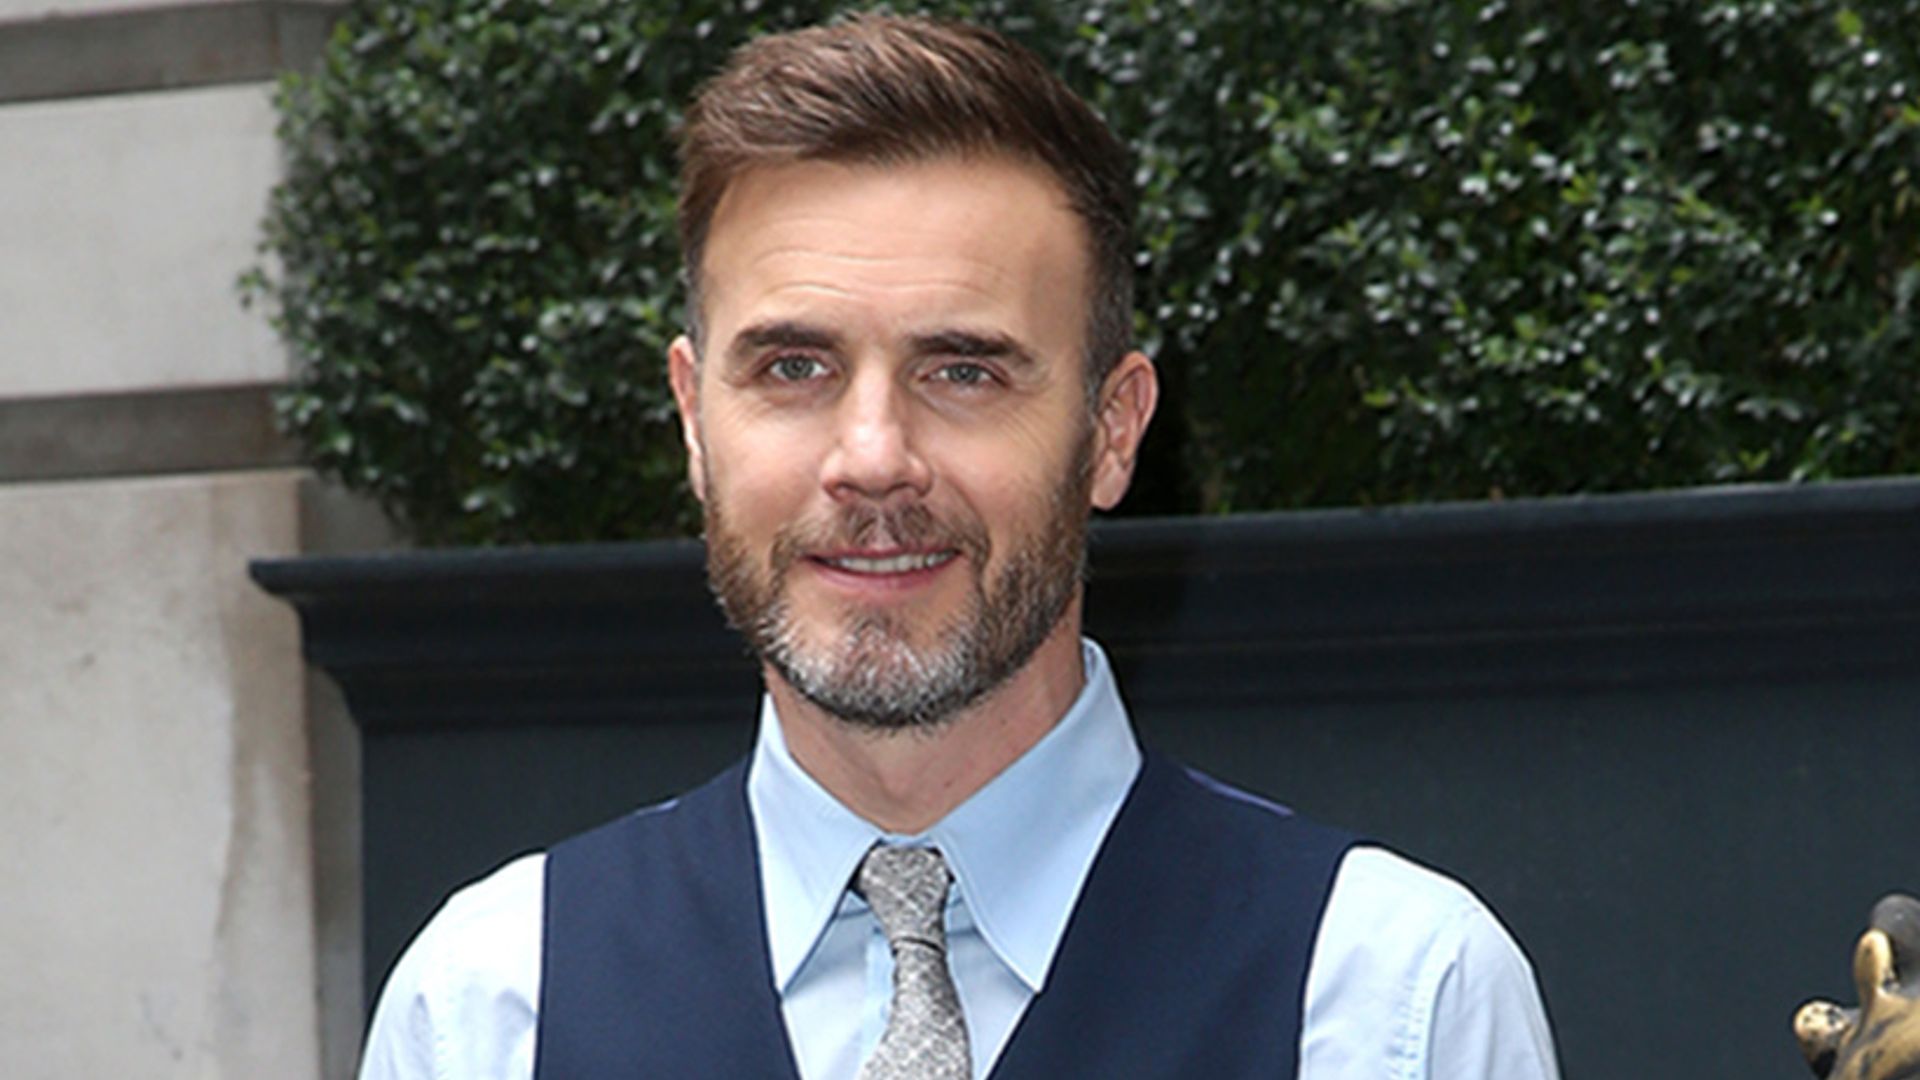 Gary Barlow's daughter Emily takes stunning photo of her dad